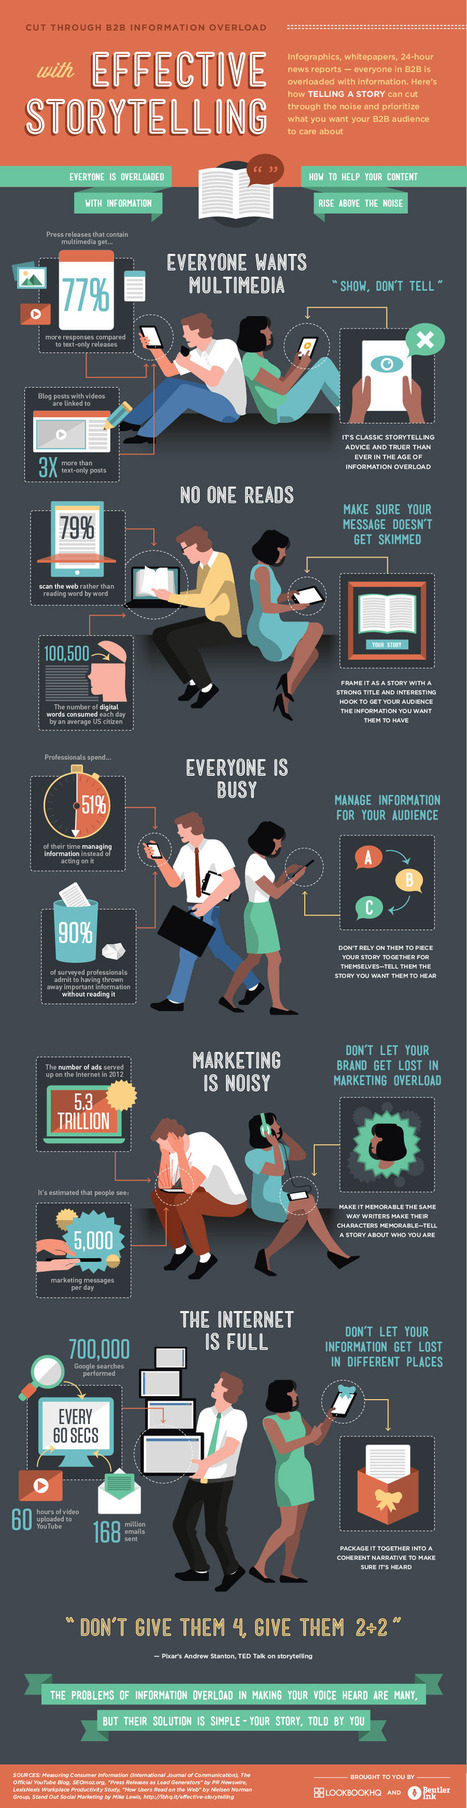 Effective Storytelling in the Information Age: Infographic | e-commerce & social media | Scoop.it